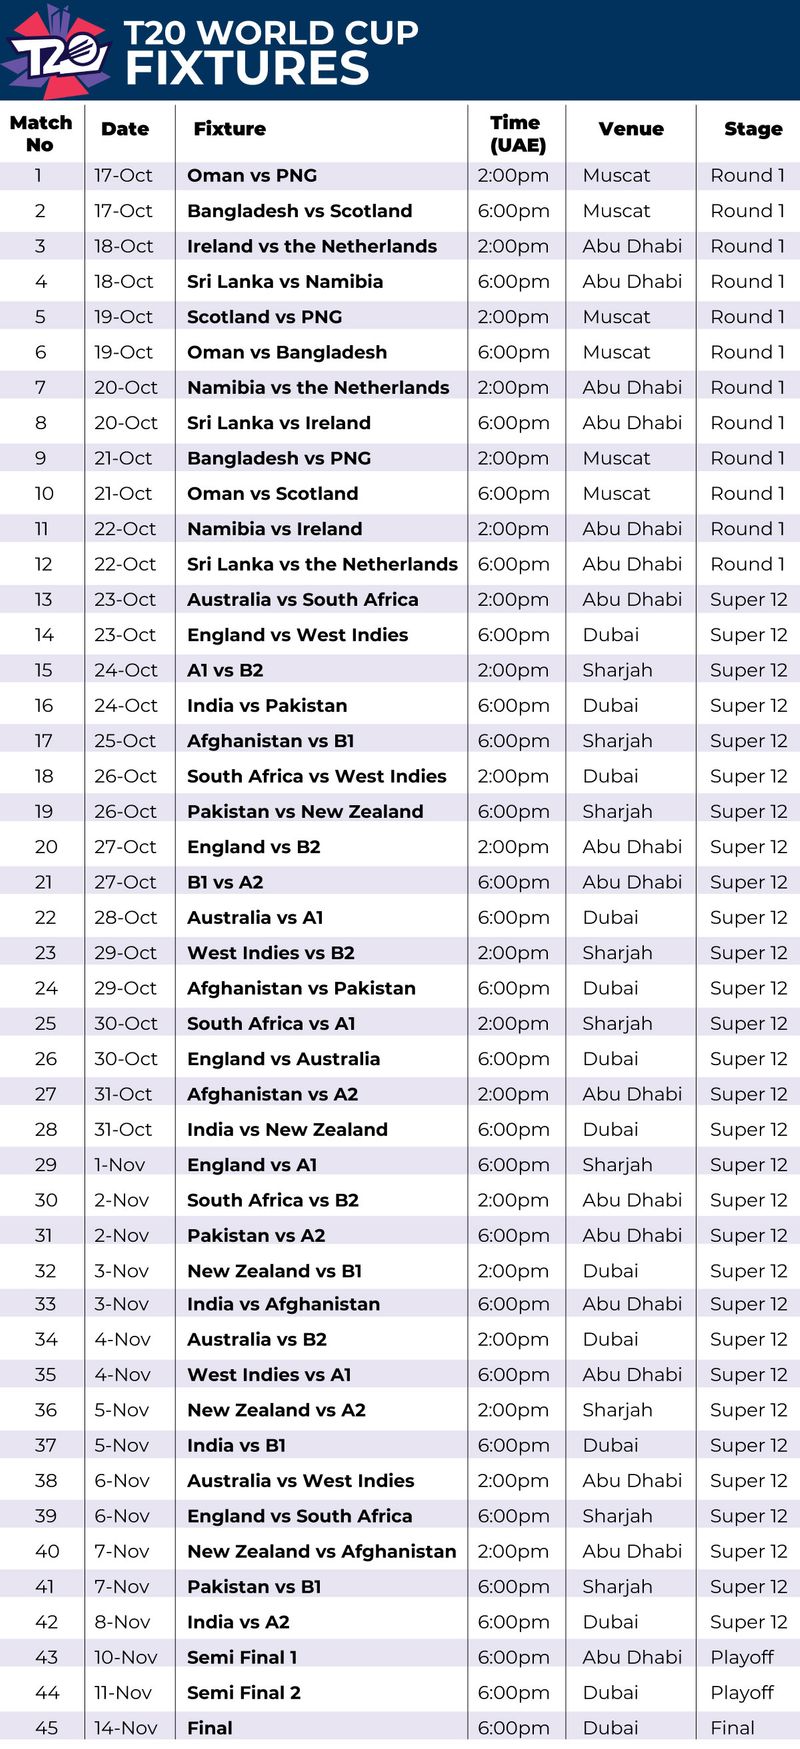 T20 World Cup 2021 fixtures v2